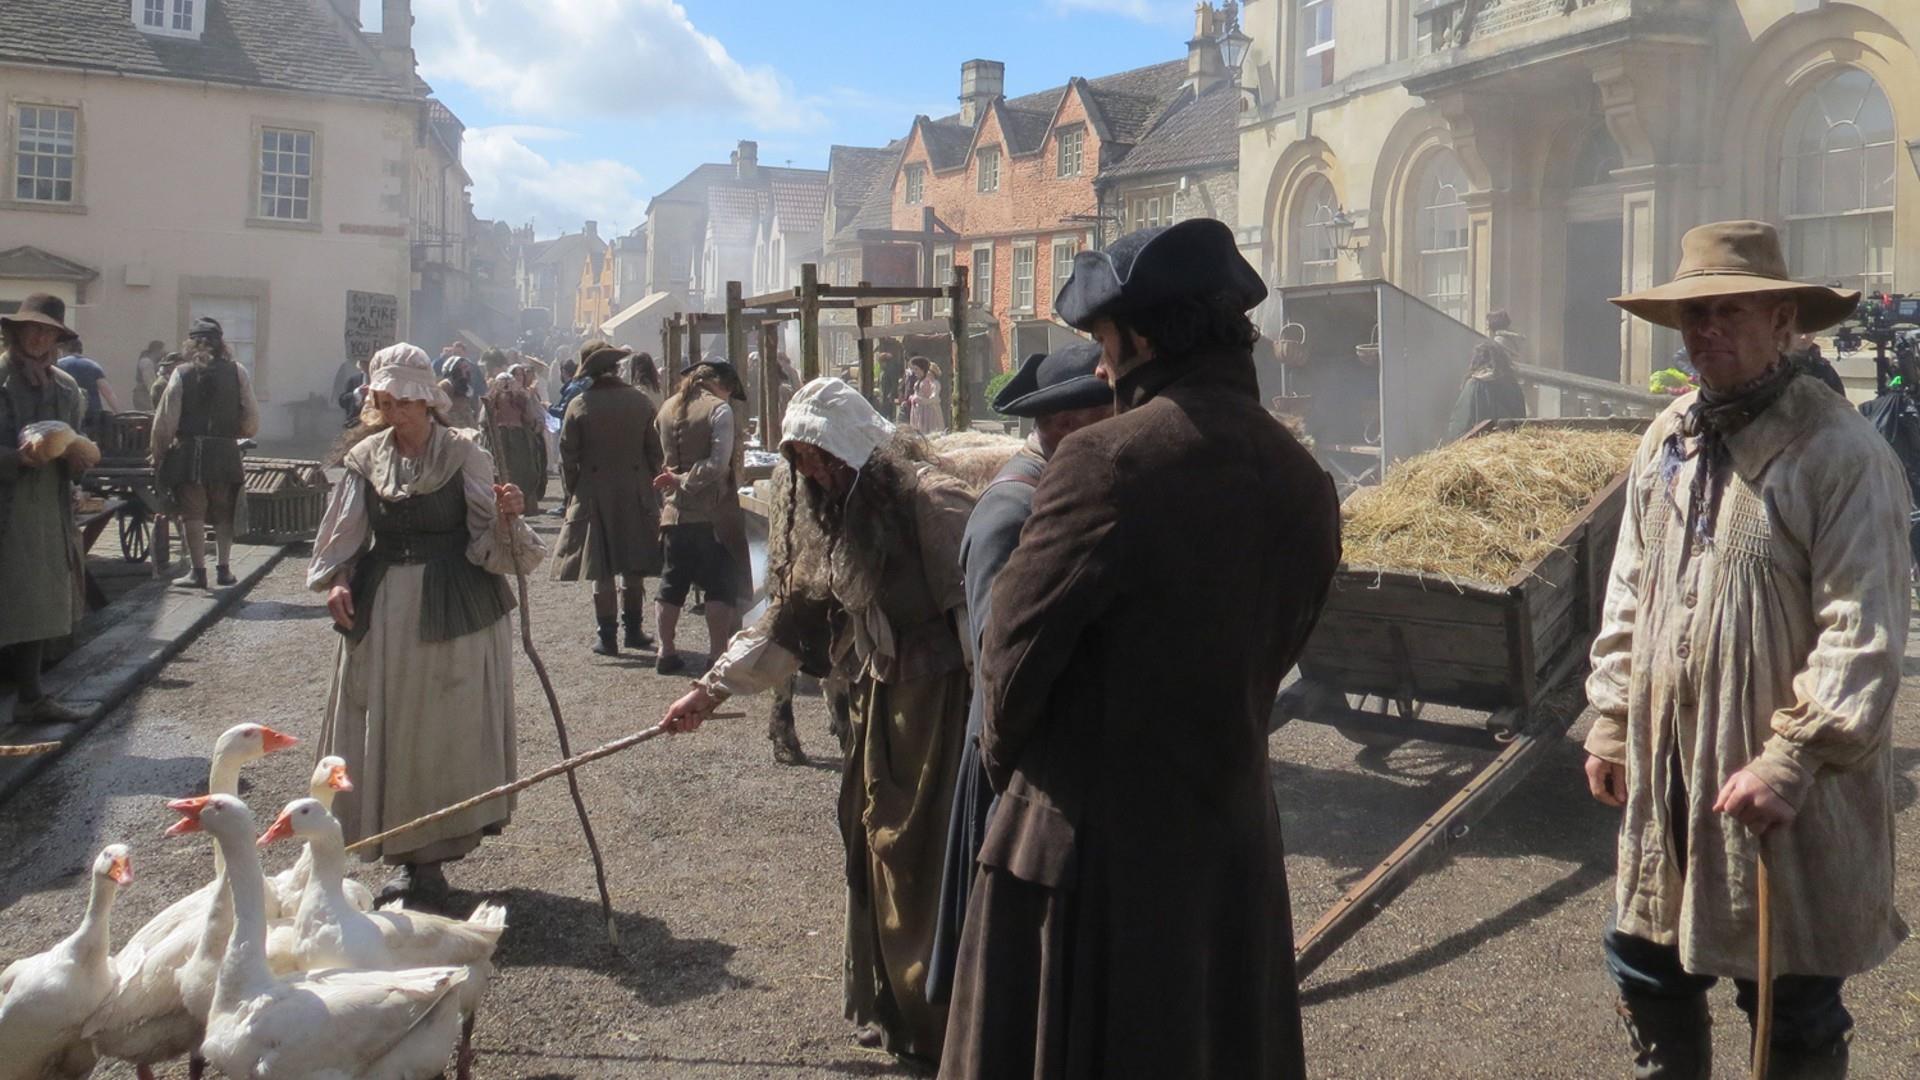 Filming at Corsham Town Hall for TV show, Poldark